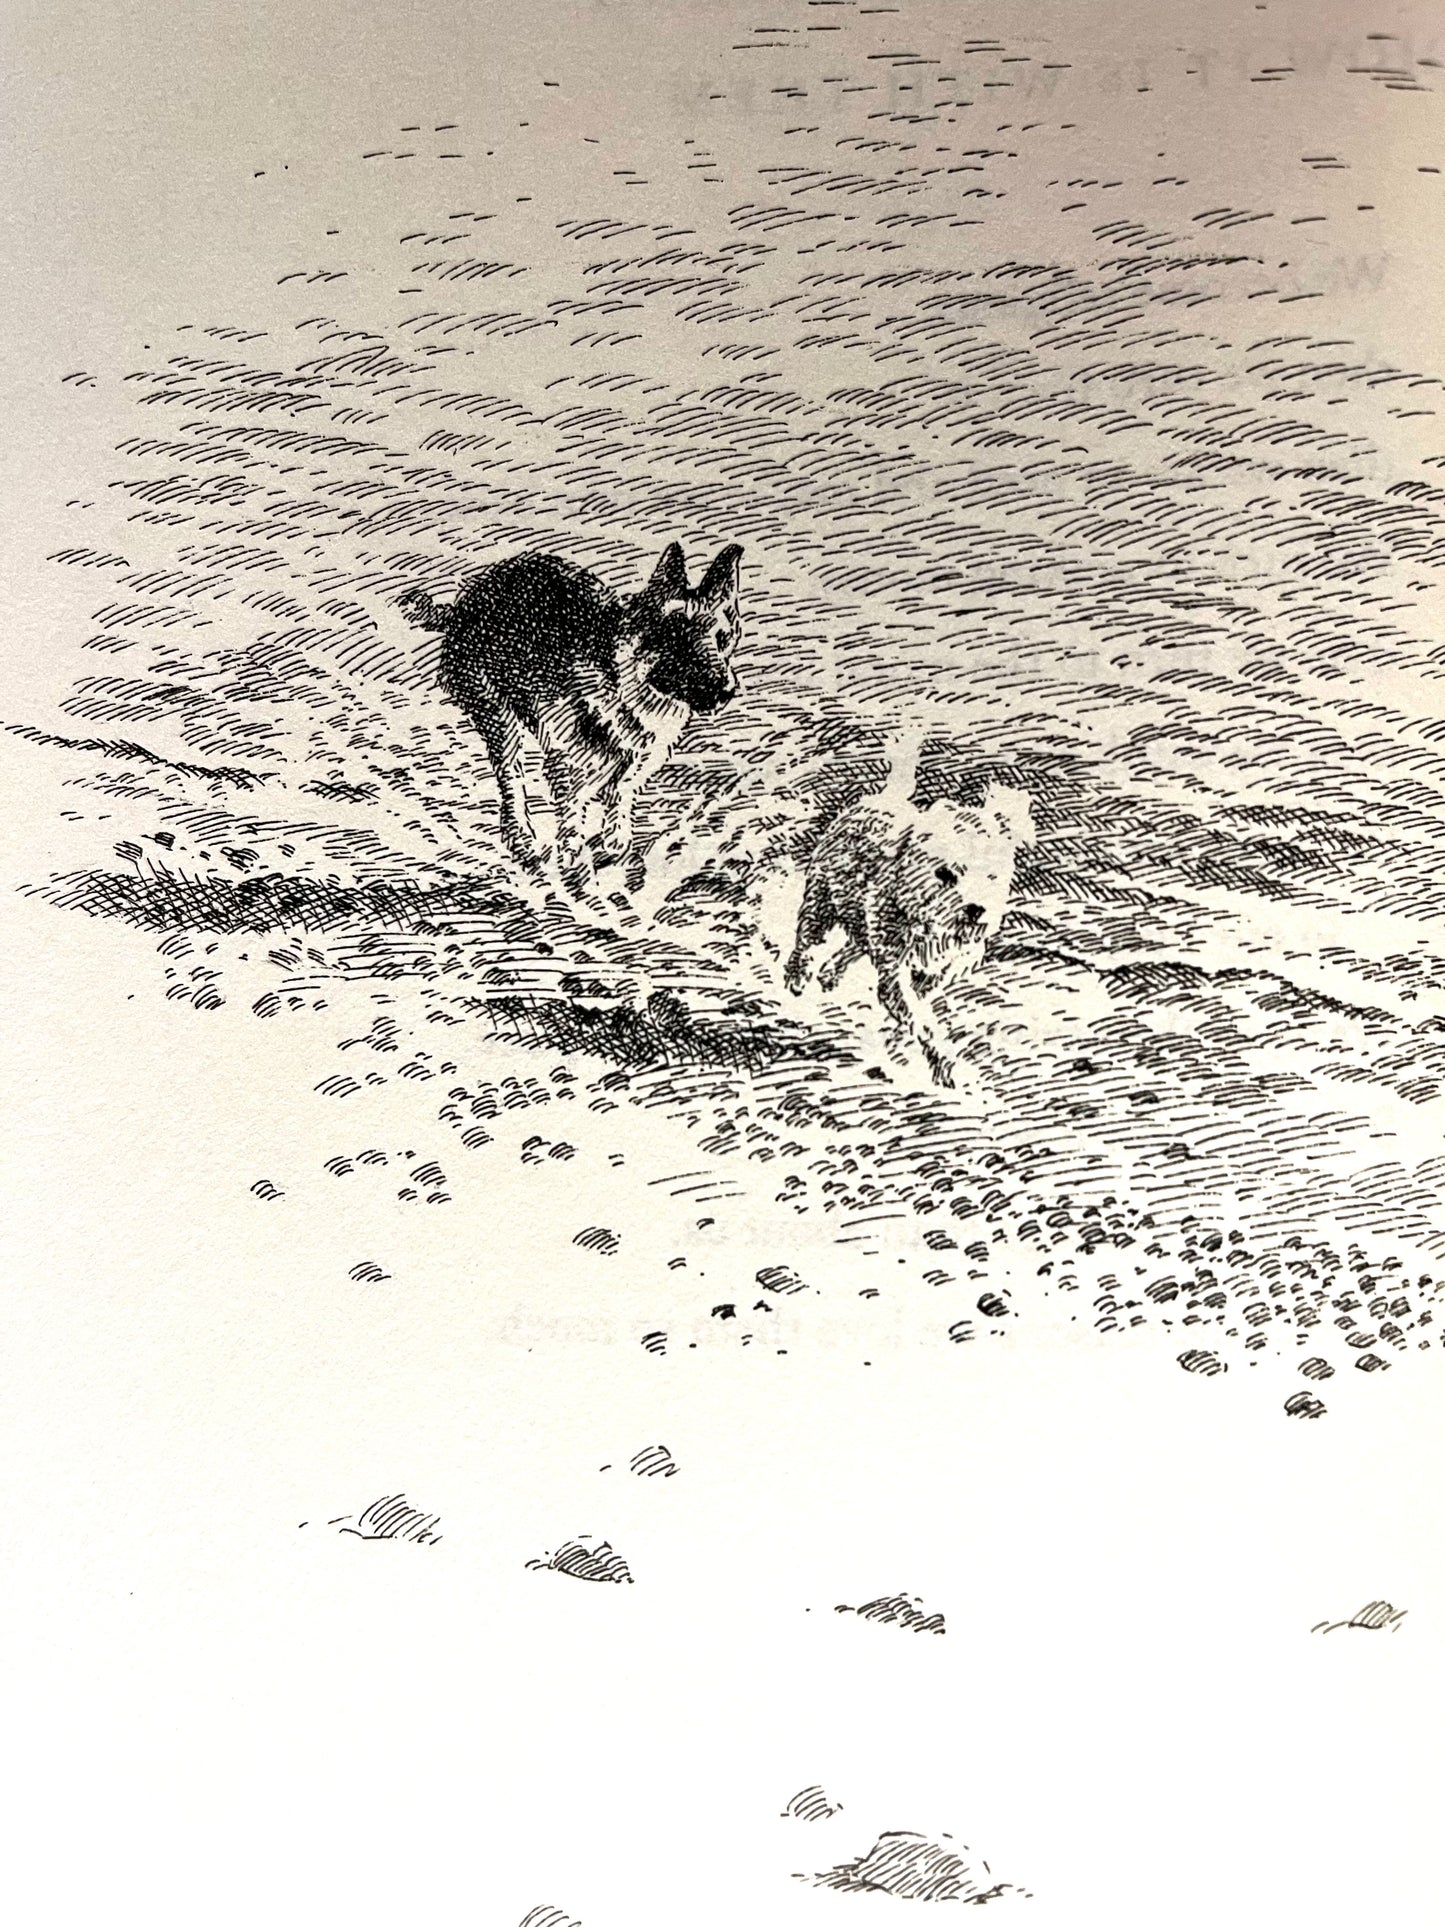 Parenting Resource Book - DOG SONGS, poems by Mary Oliver